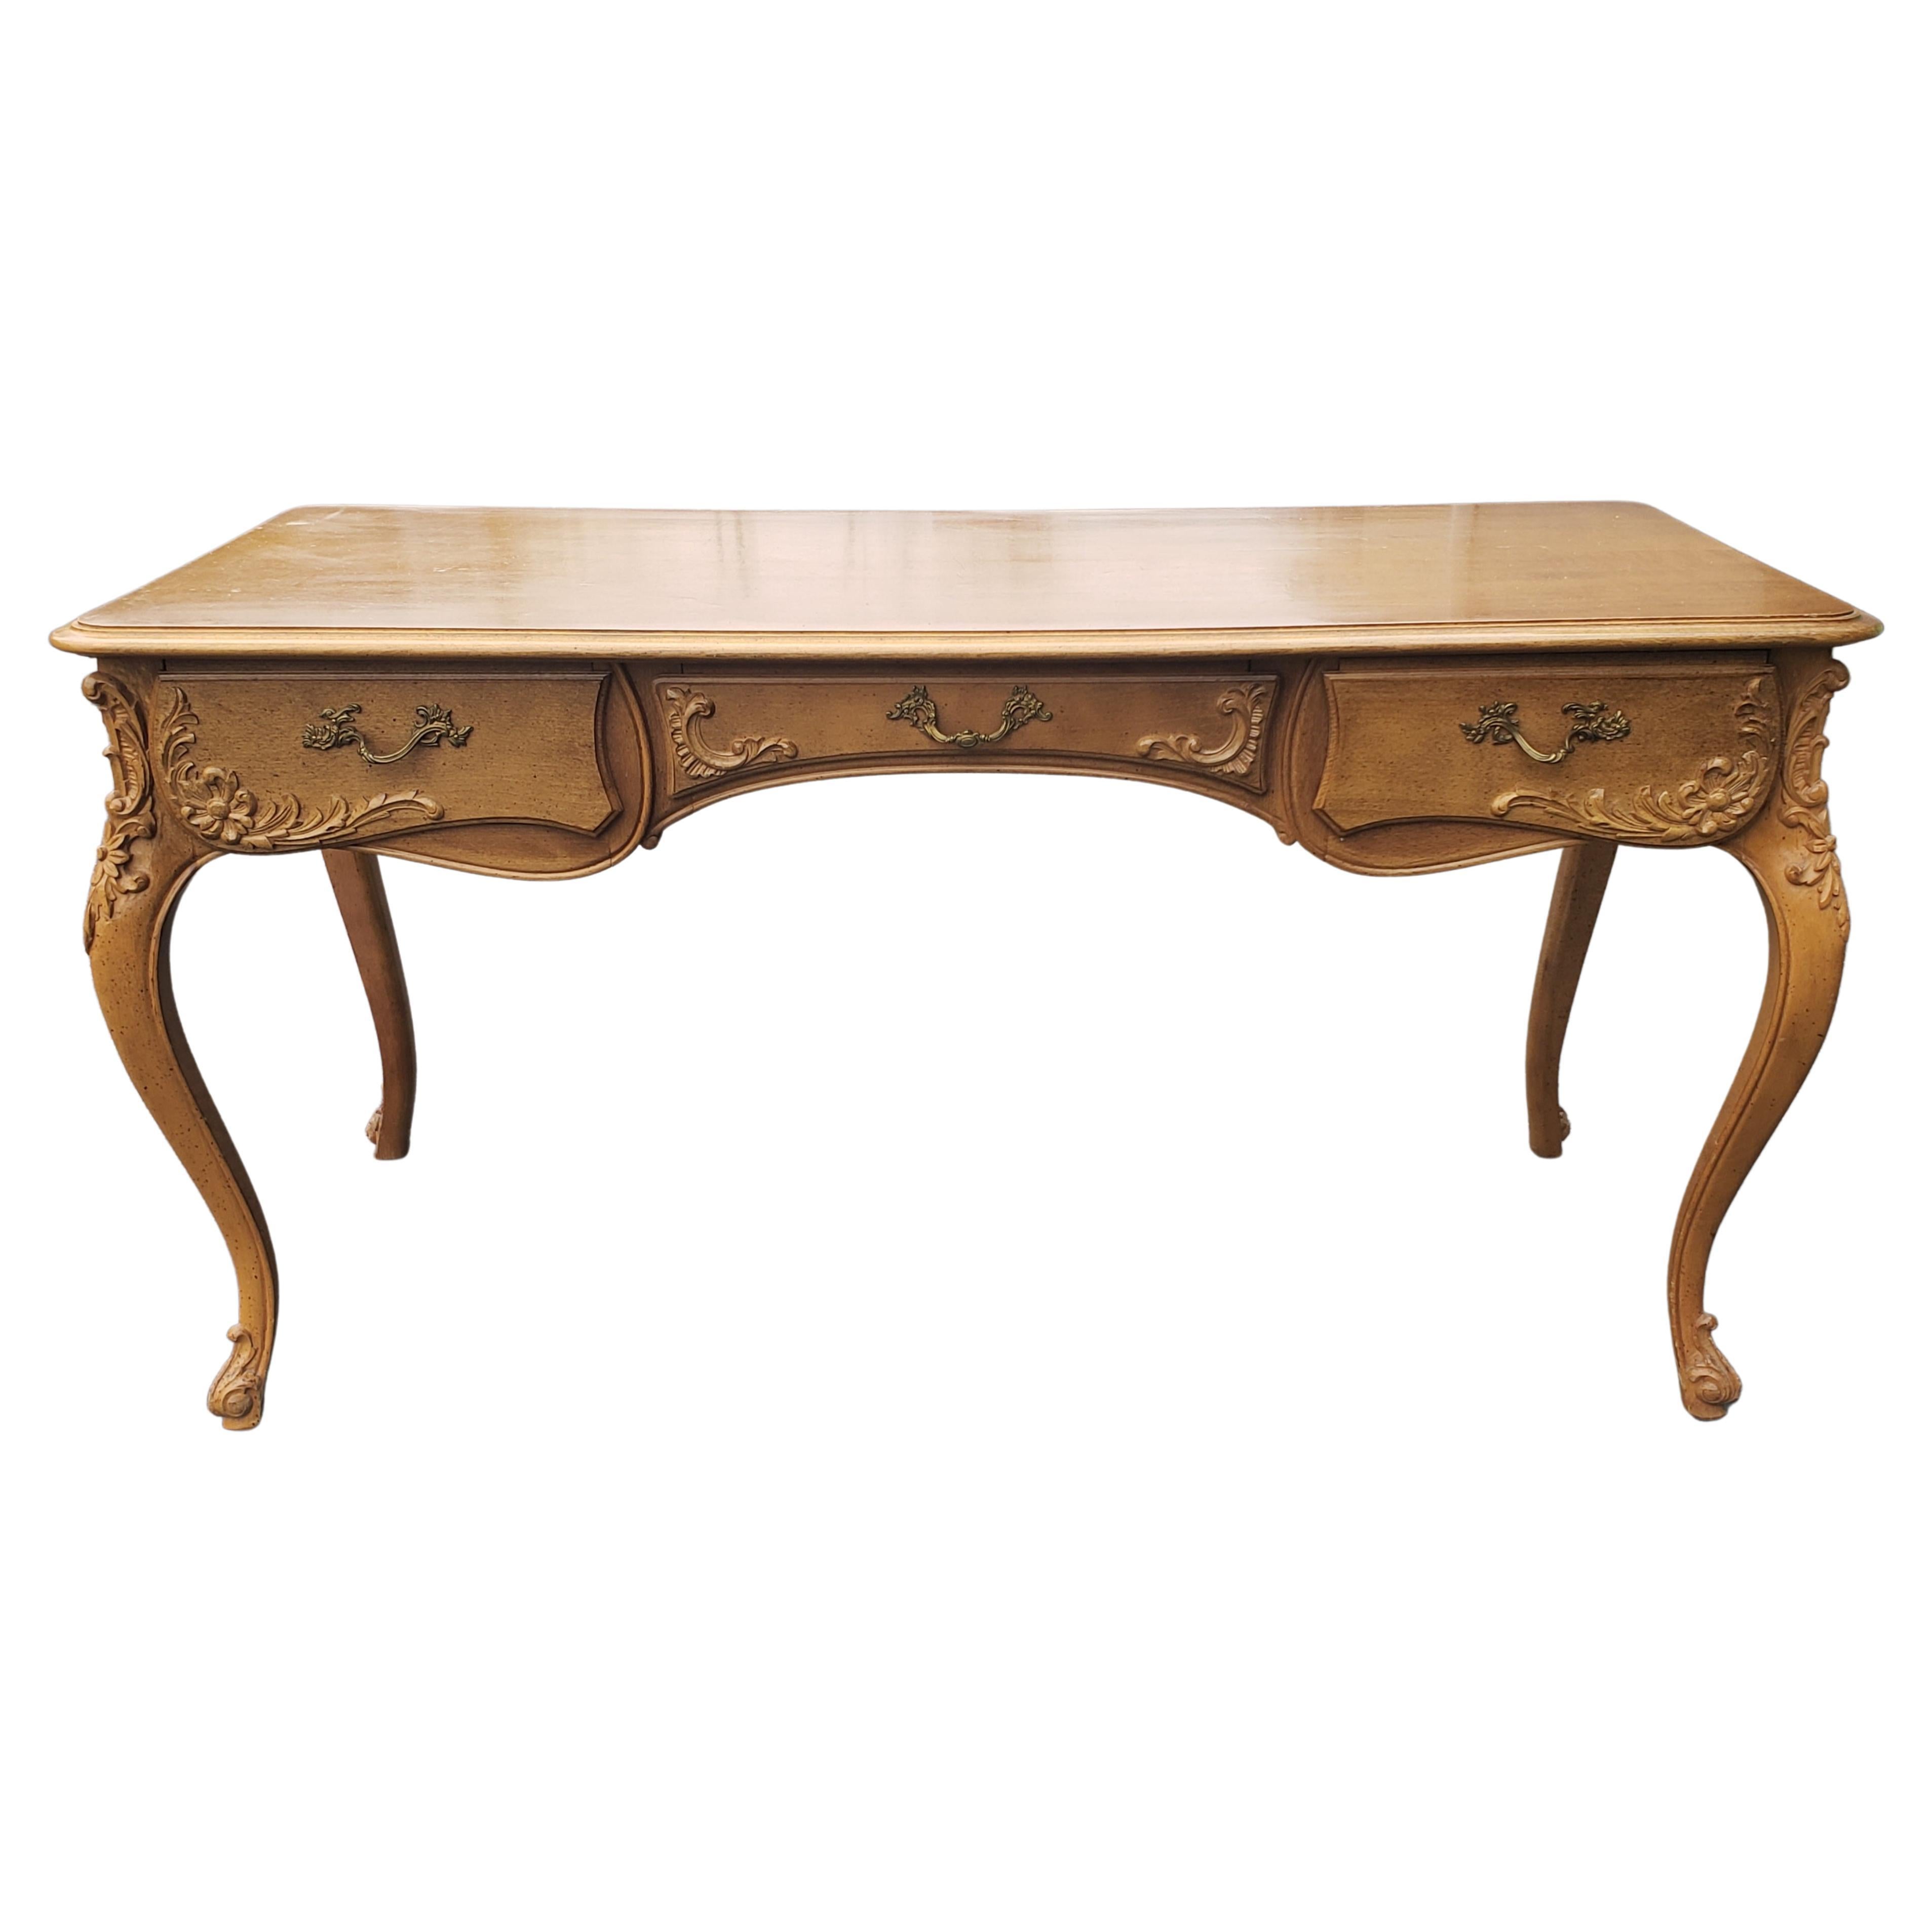 Beautiful French writing desk in solid maple.
Intricate carvings and original hardware. 
Measures 56